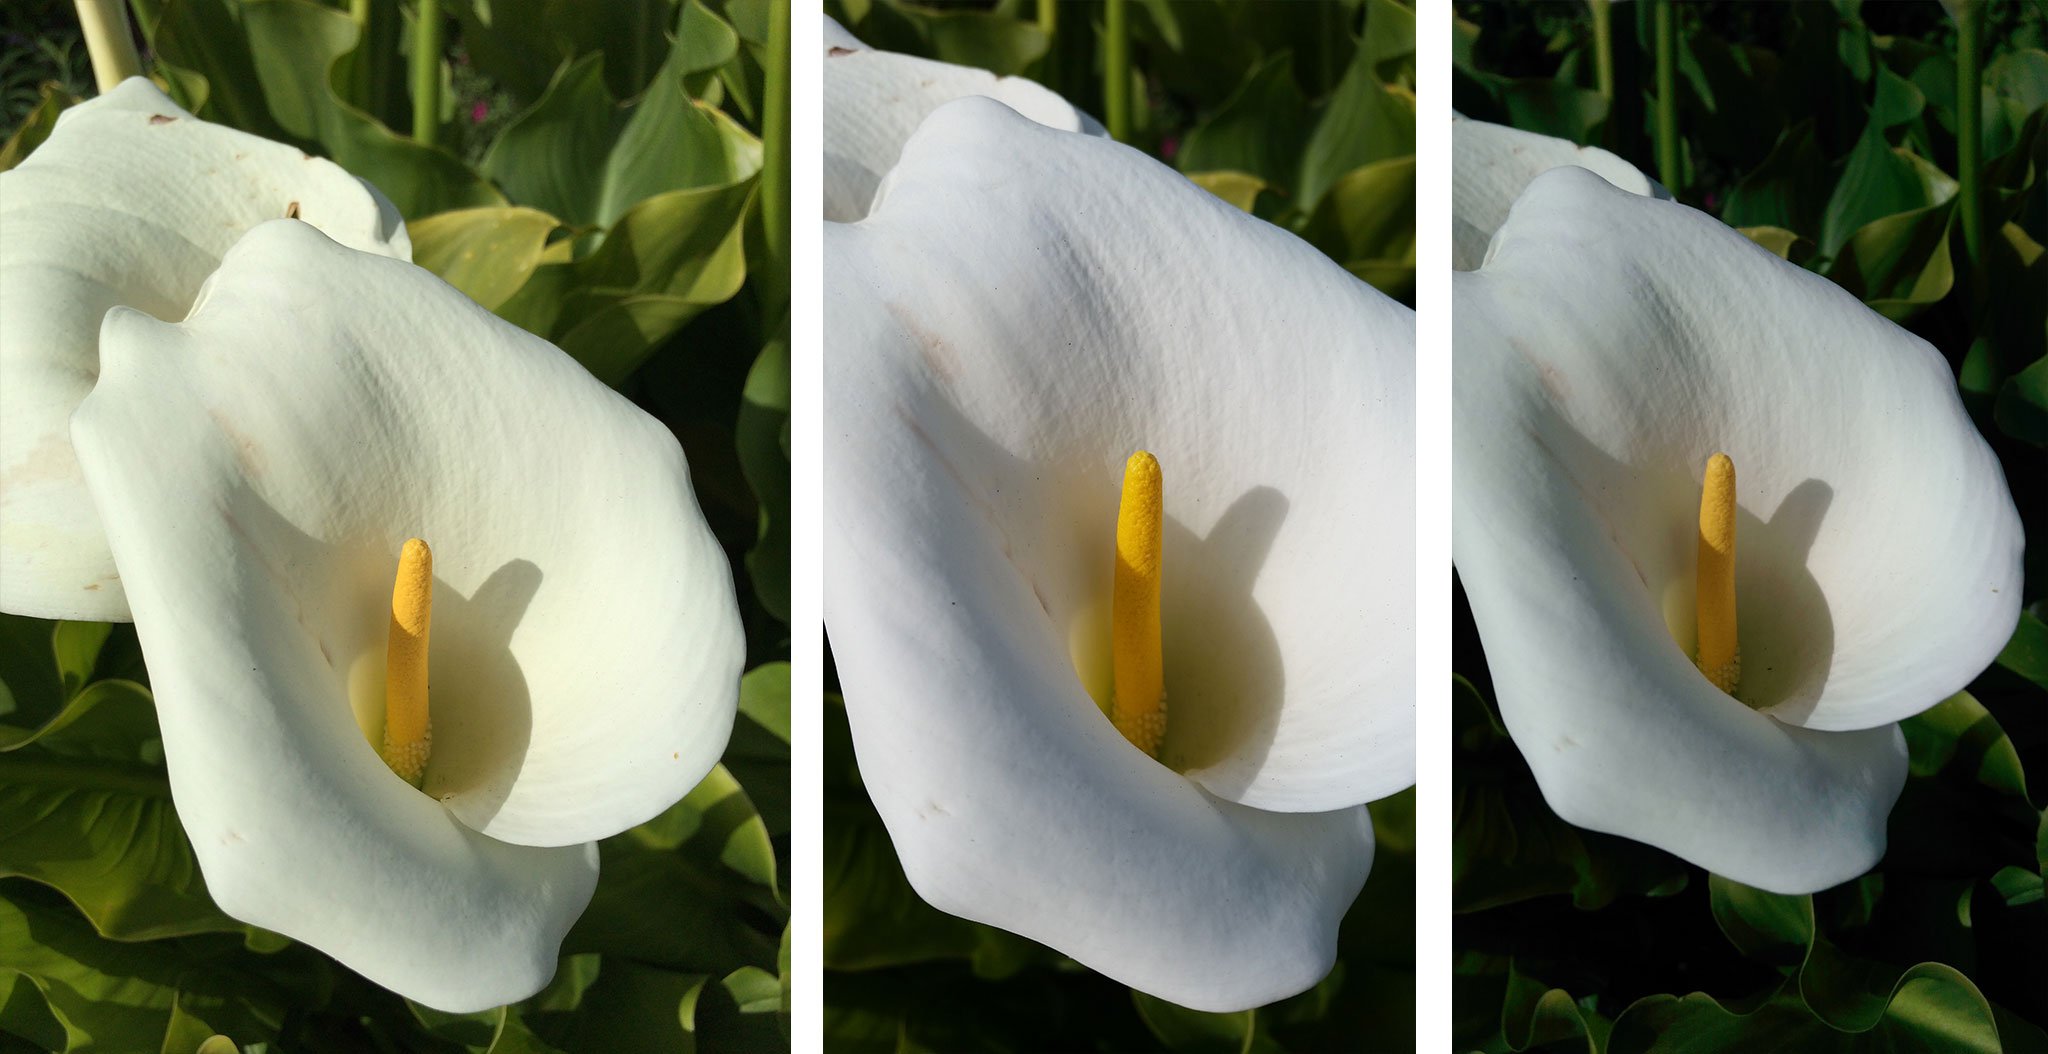 iPhone 5s vs. Galaxy S5 vs. HTC One M8: Macro and closeup photography